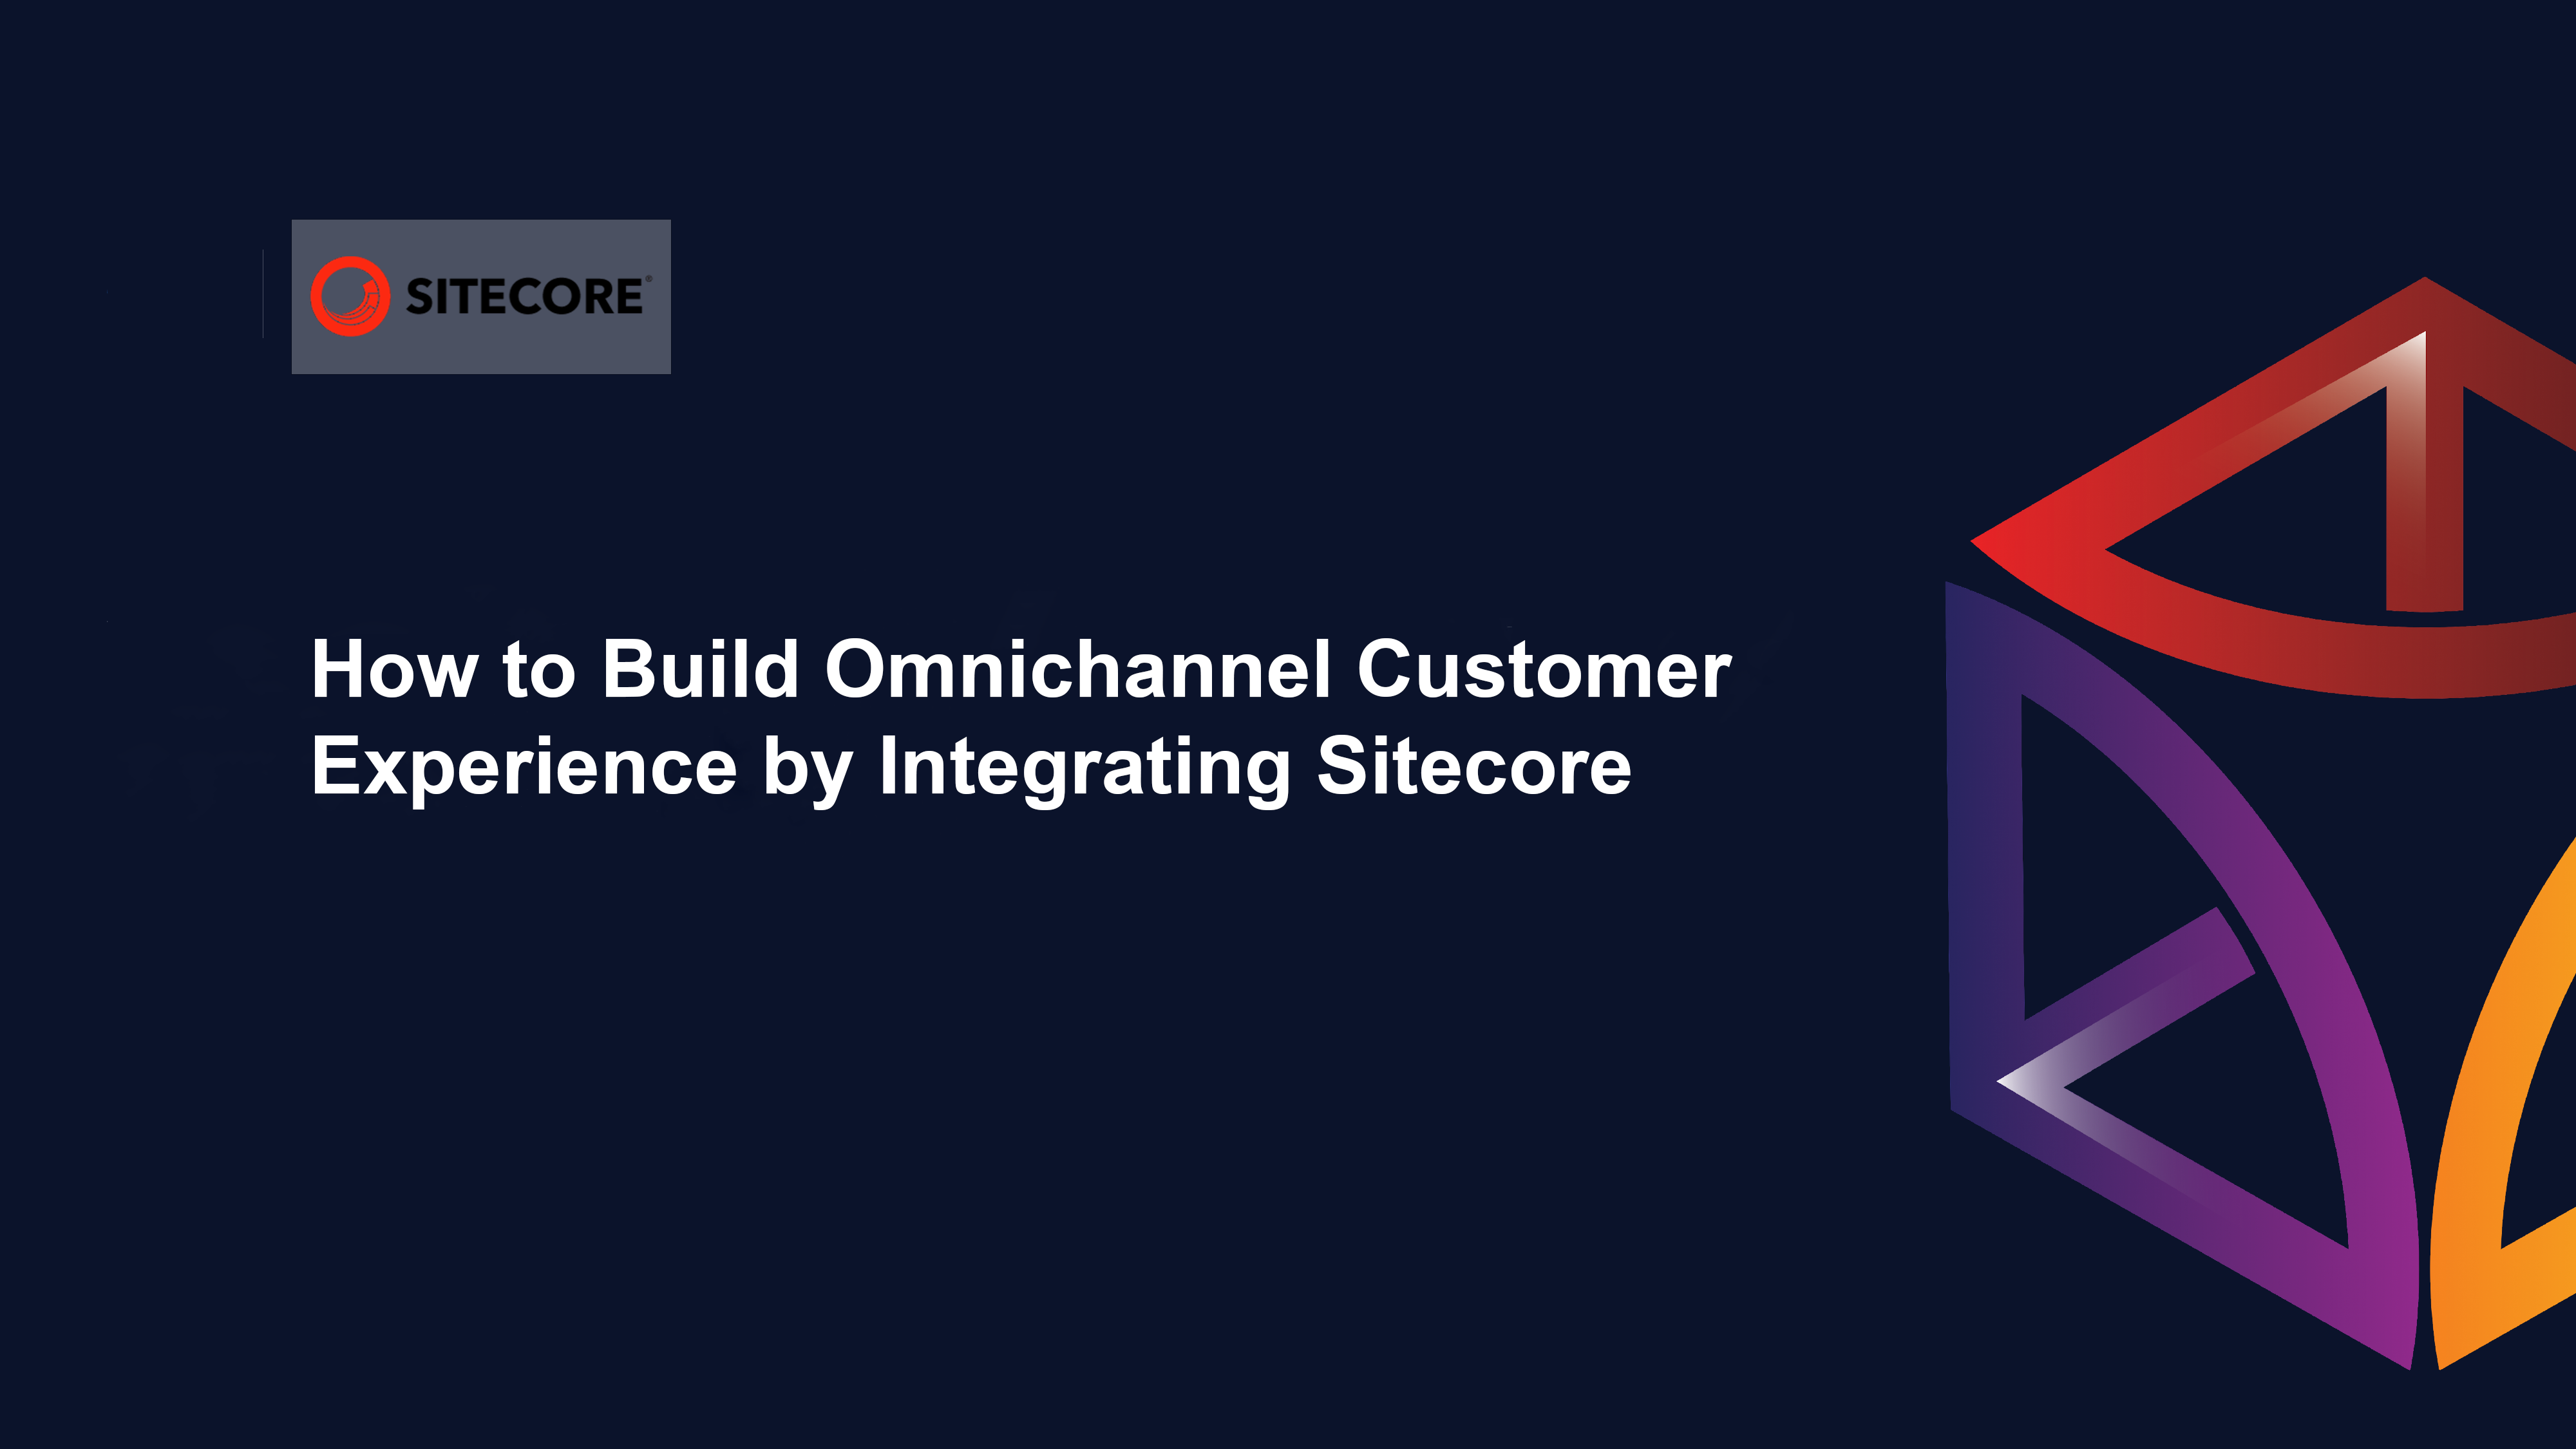 How to Build Omnichannel Customer Experience by Integrating Sitecore